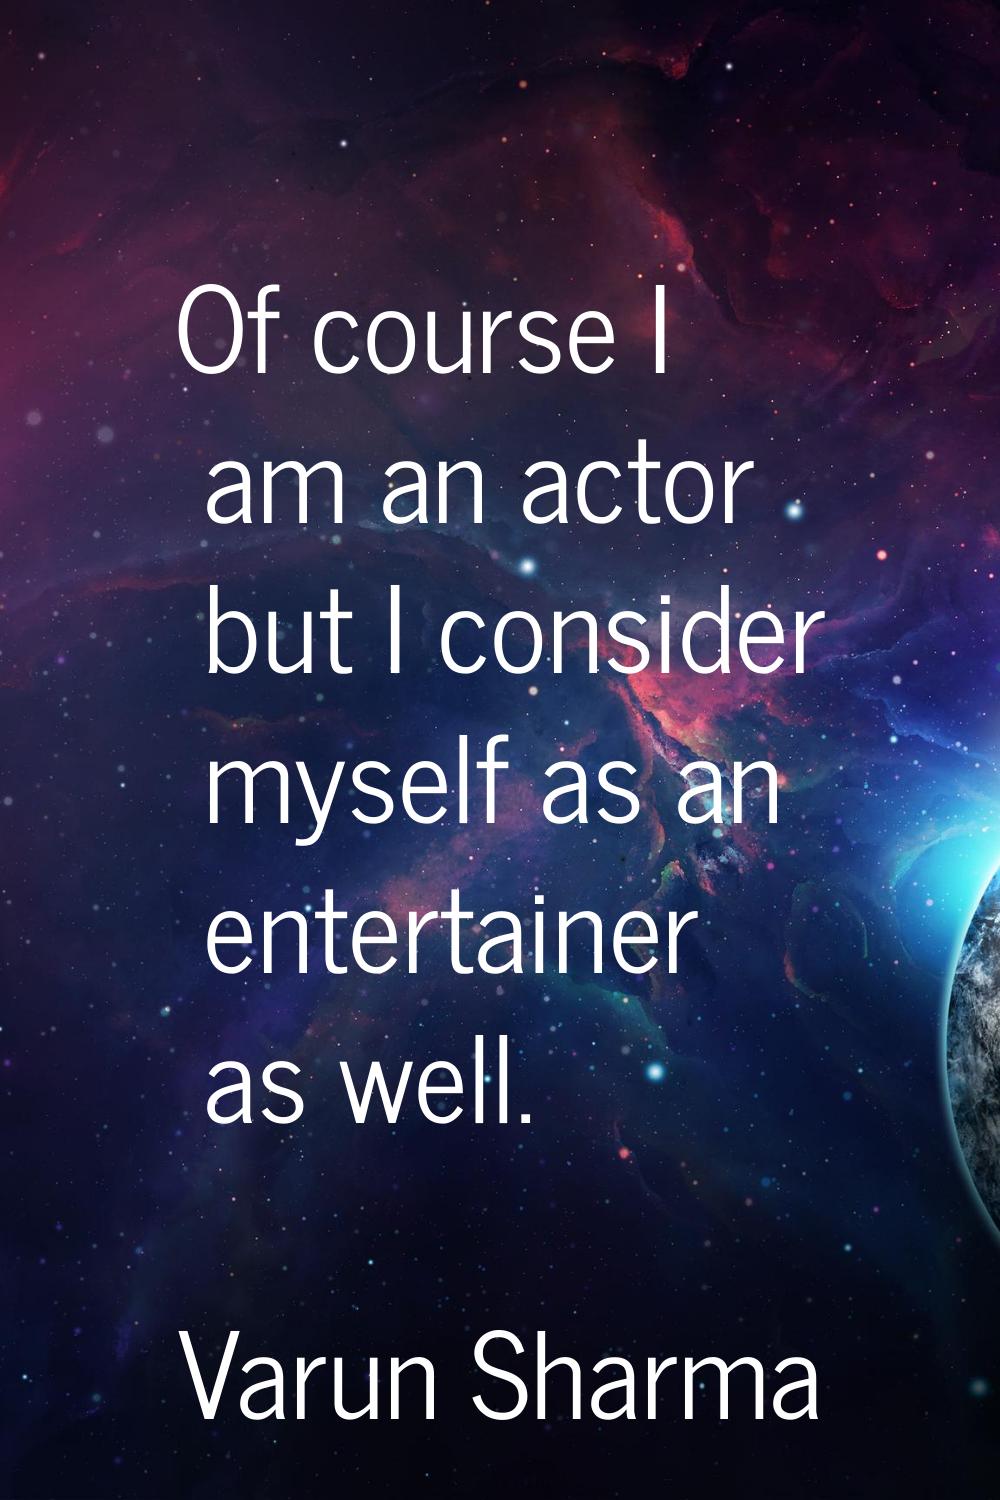 Of course I am an actor but I consider myself as an entertainer as well.